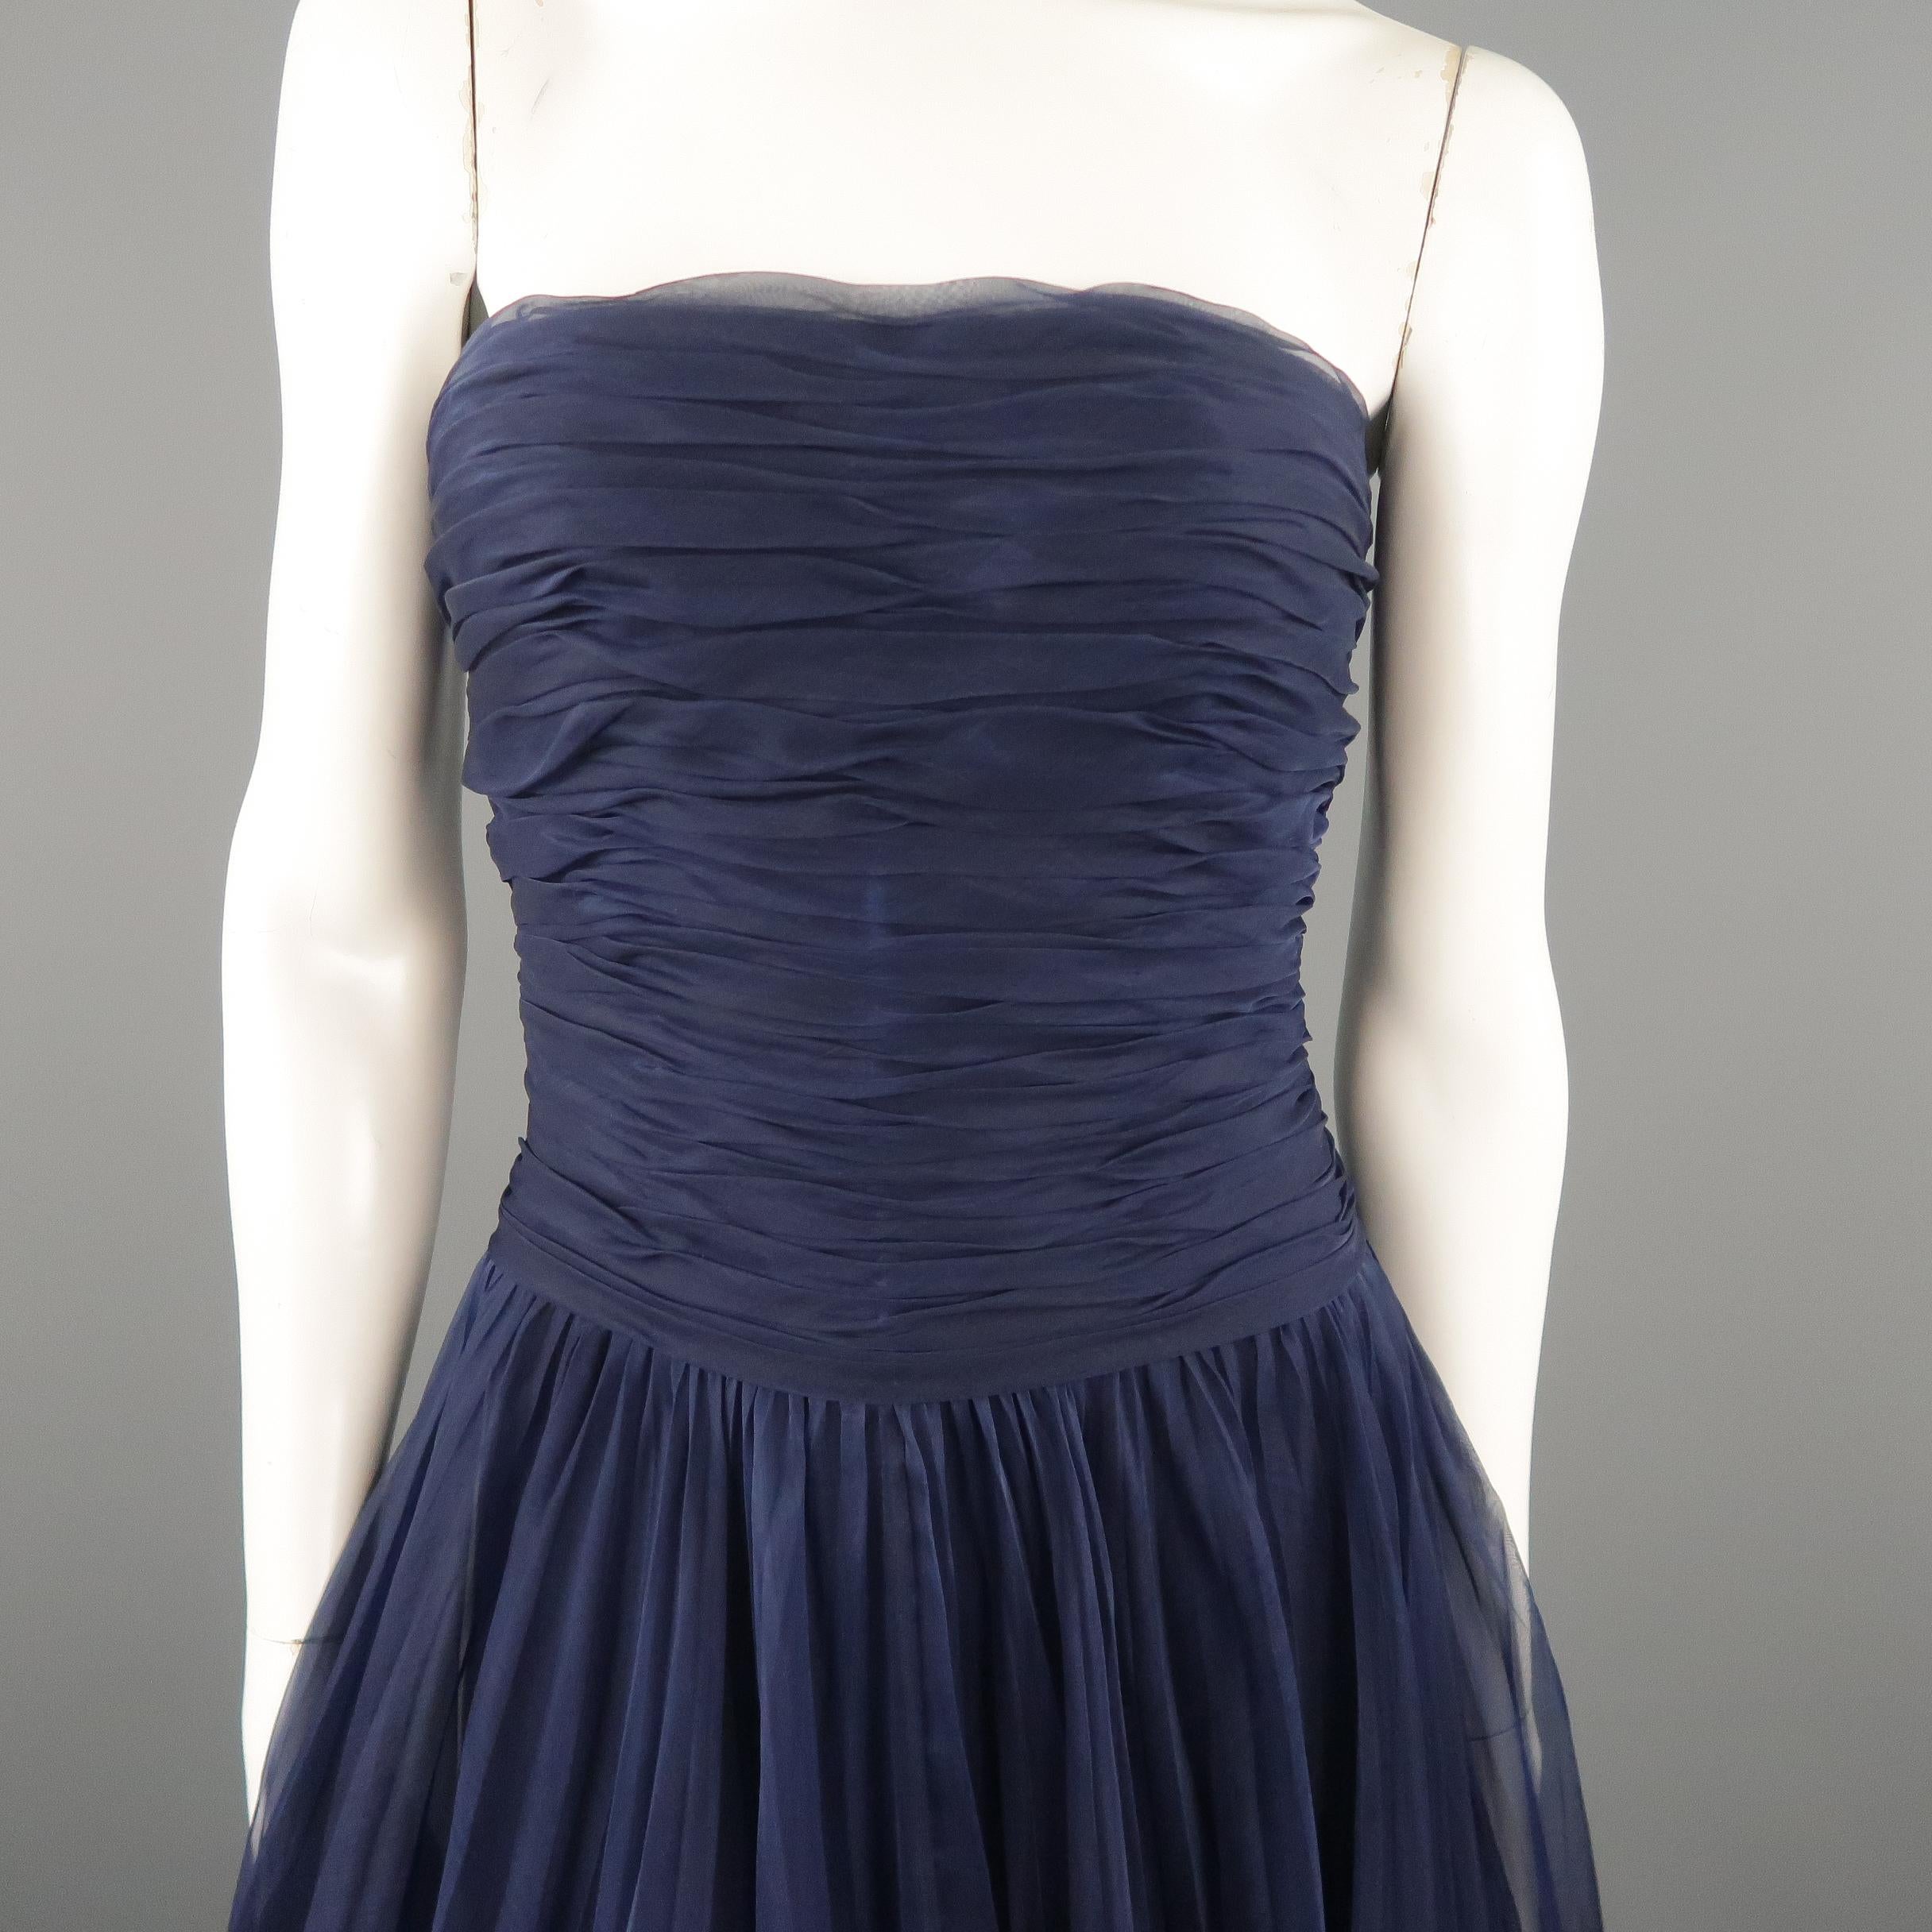 Vintage Spring Summer 1997 CHANEL BOUTIQUE cocktail dress comes in navy blue silk with a gathered bustier top detailed with a button up back closure and ankle length loose pleated textured A line skirt. Discoloration on bodice and minor wear. As-is.